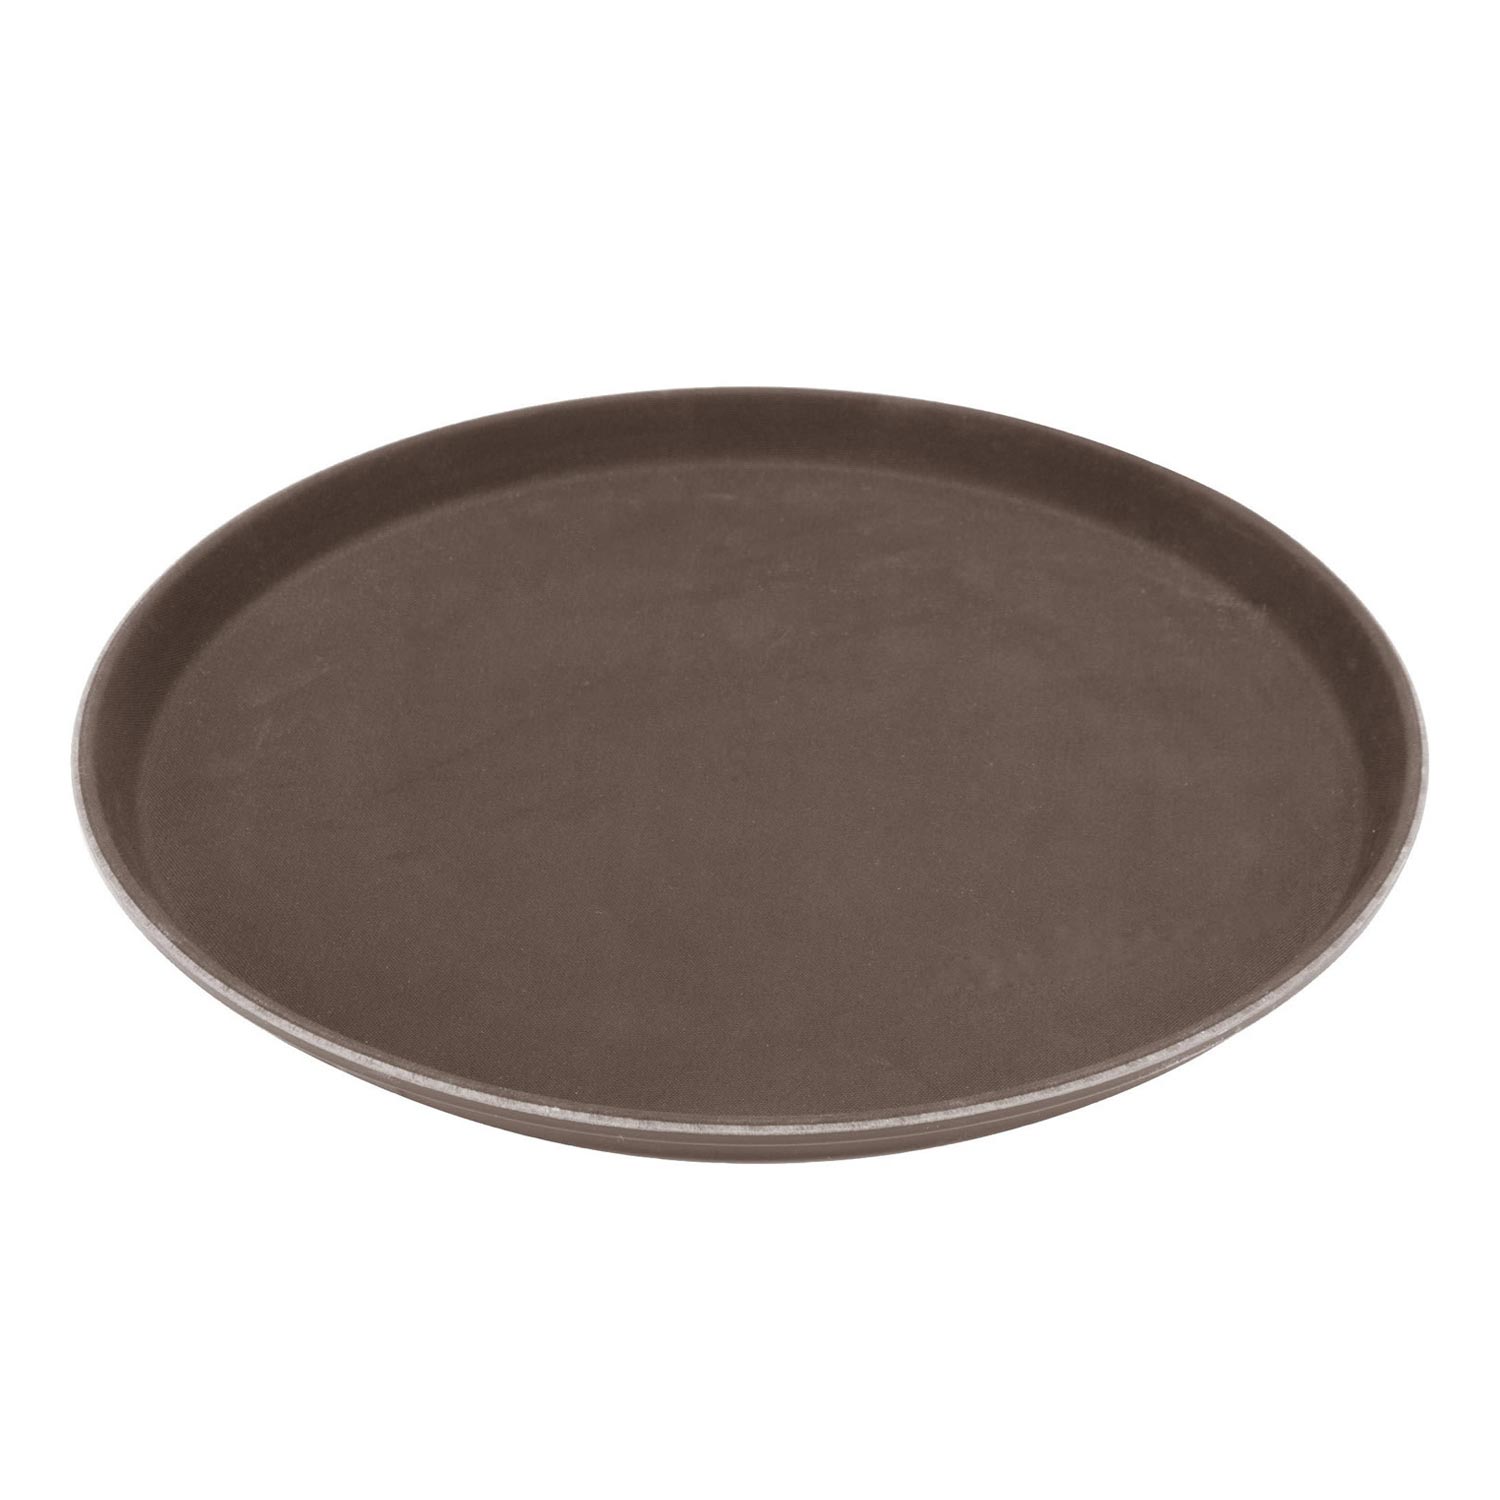 Tray round brown 14